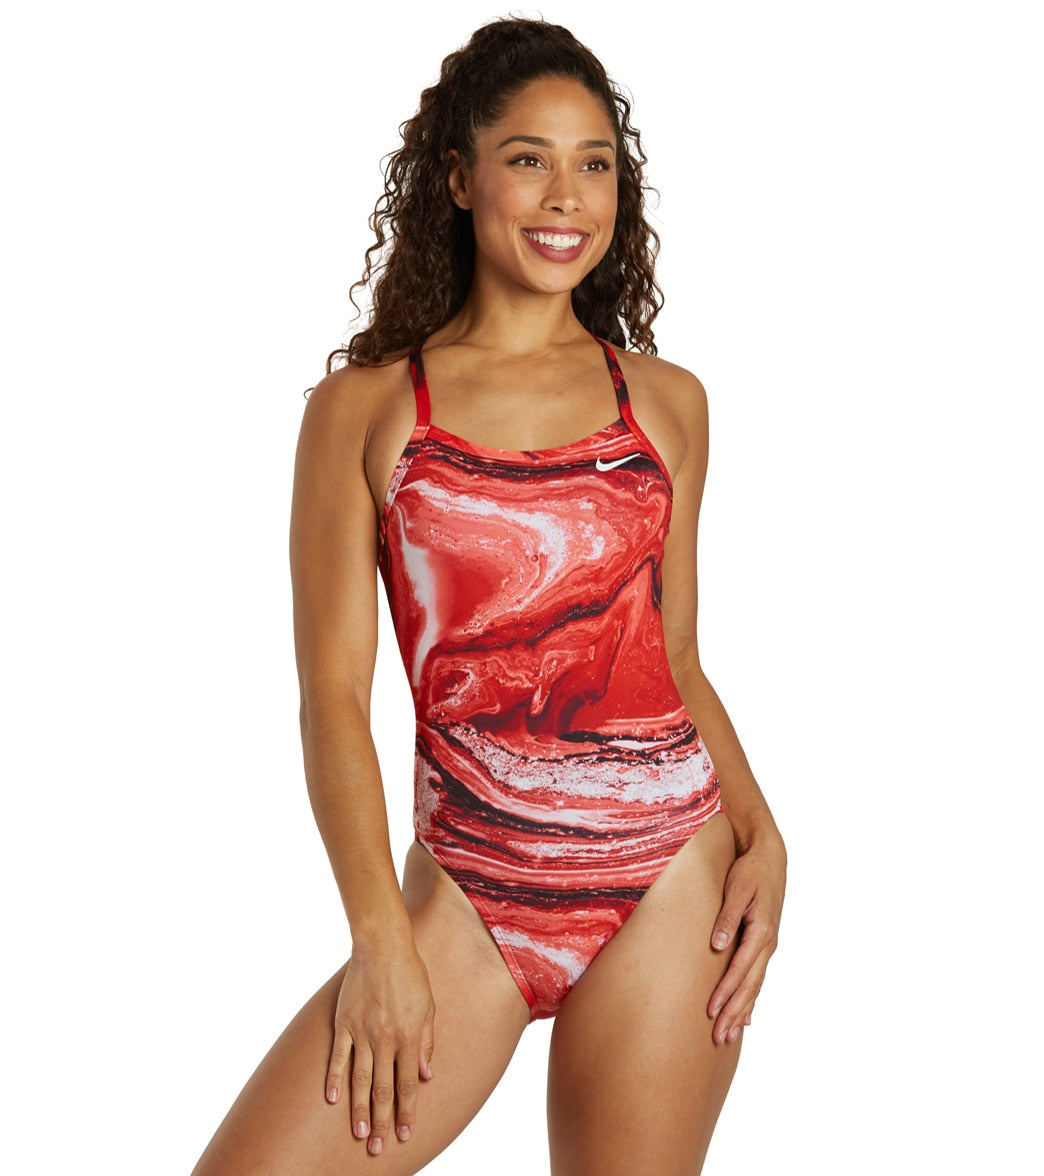 Nike Womens HydraStrong Crystal Wave Racerback One Piece Swimsuit